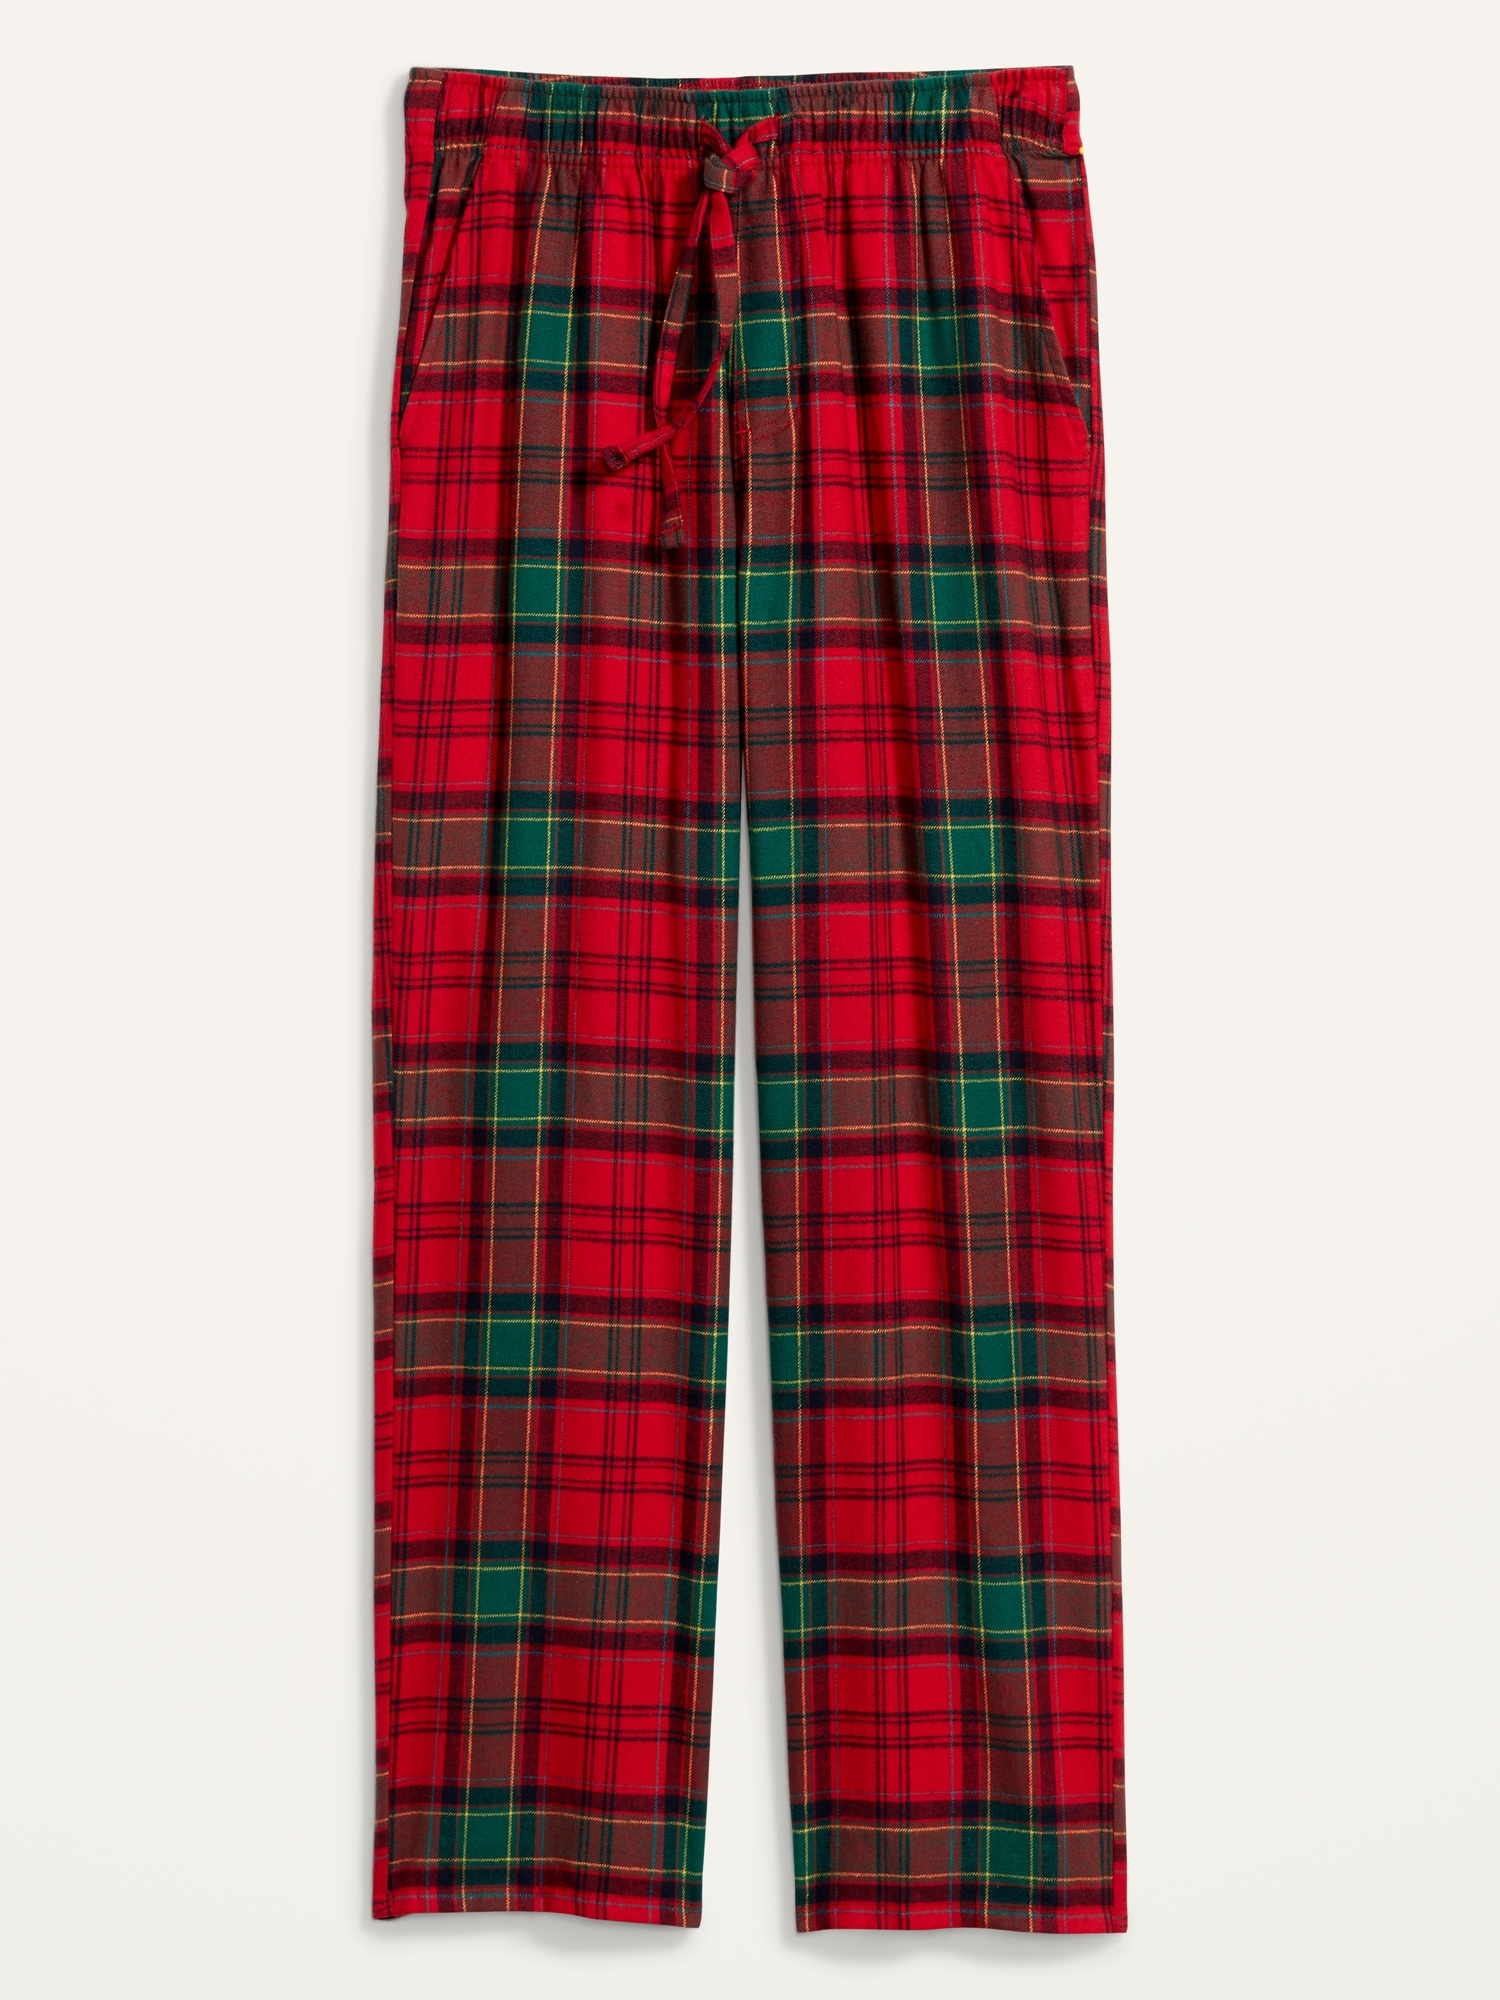 green and red plaid pants